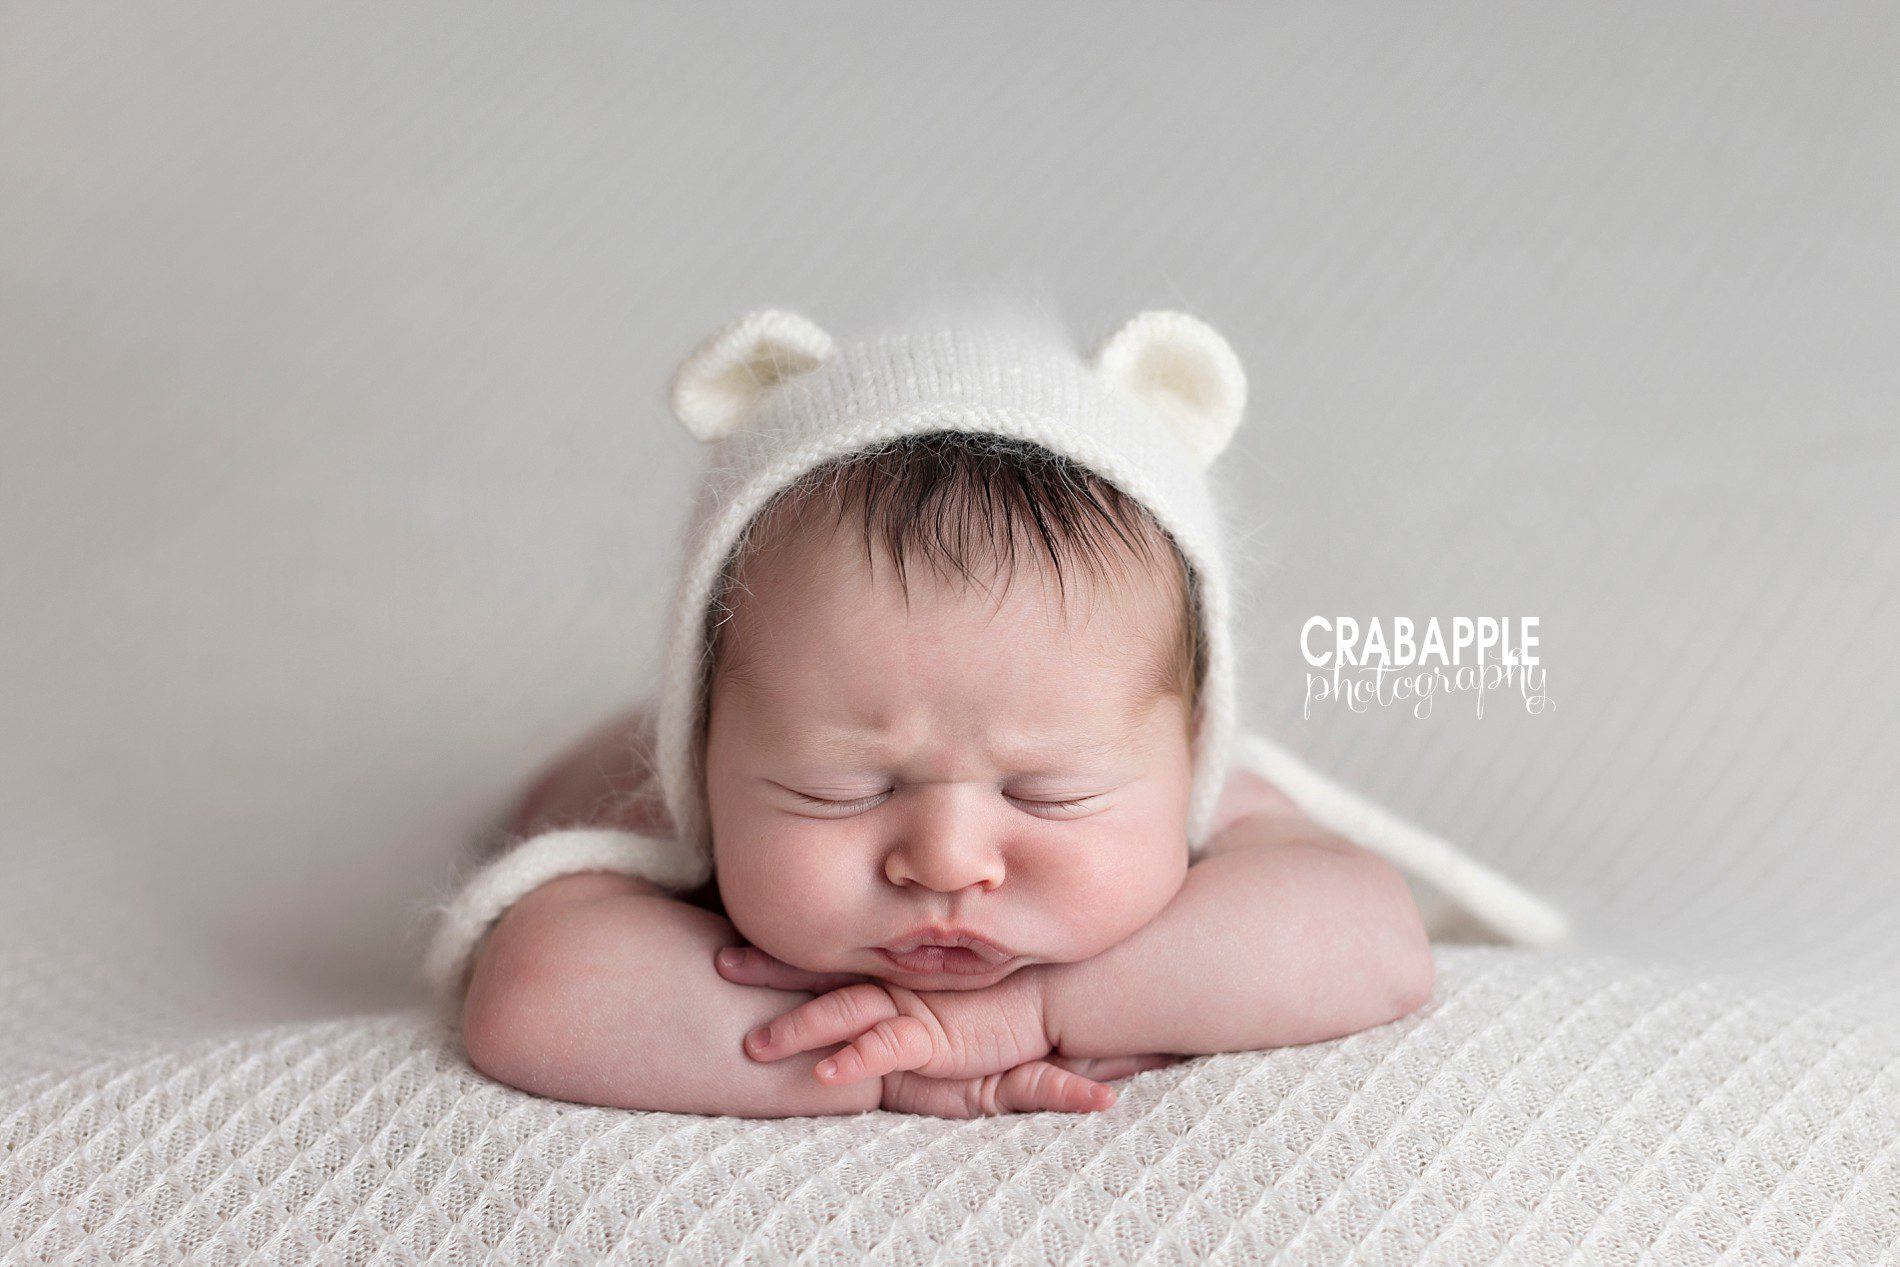 pose ideas for newborn baby pictures